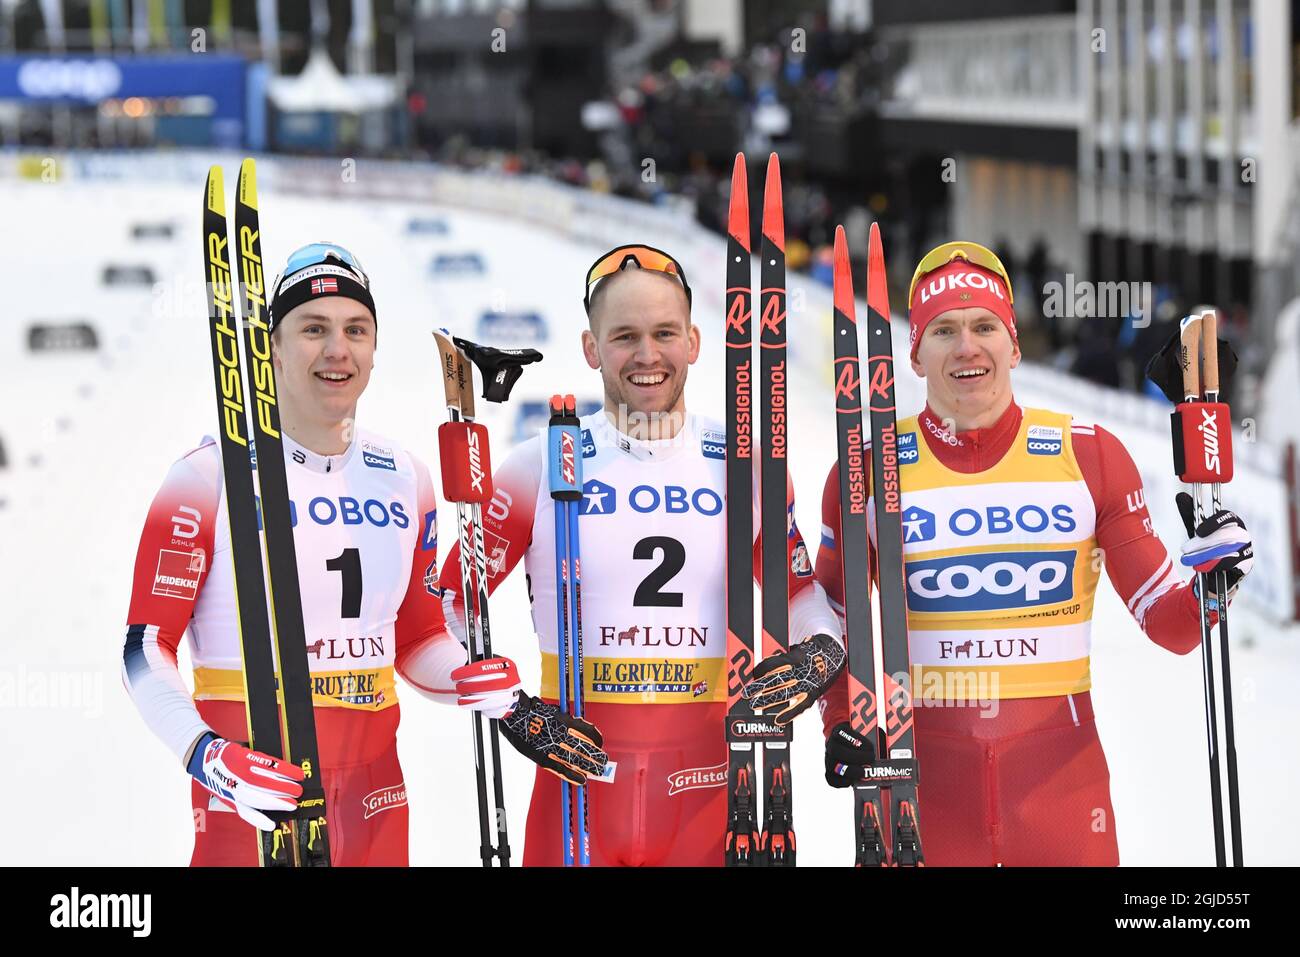 Norway's Paal Golberg winner (2) and Erik Valness (1) of Norway second place and Russias Alexander Bolshunov (R) third place during men's sprint at the FIS Cross Country Skiing World Cup in Falun, Sweden, Feb. 08, 2020. Photo: Henrik Montgomery / TT Stock Photo